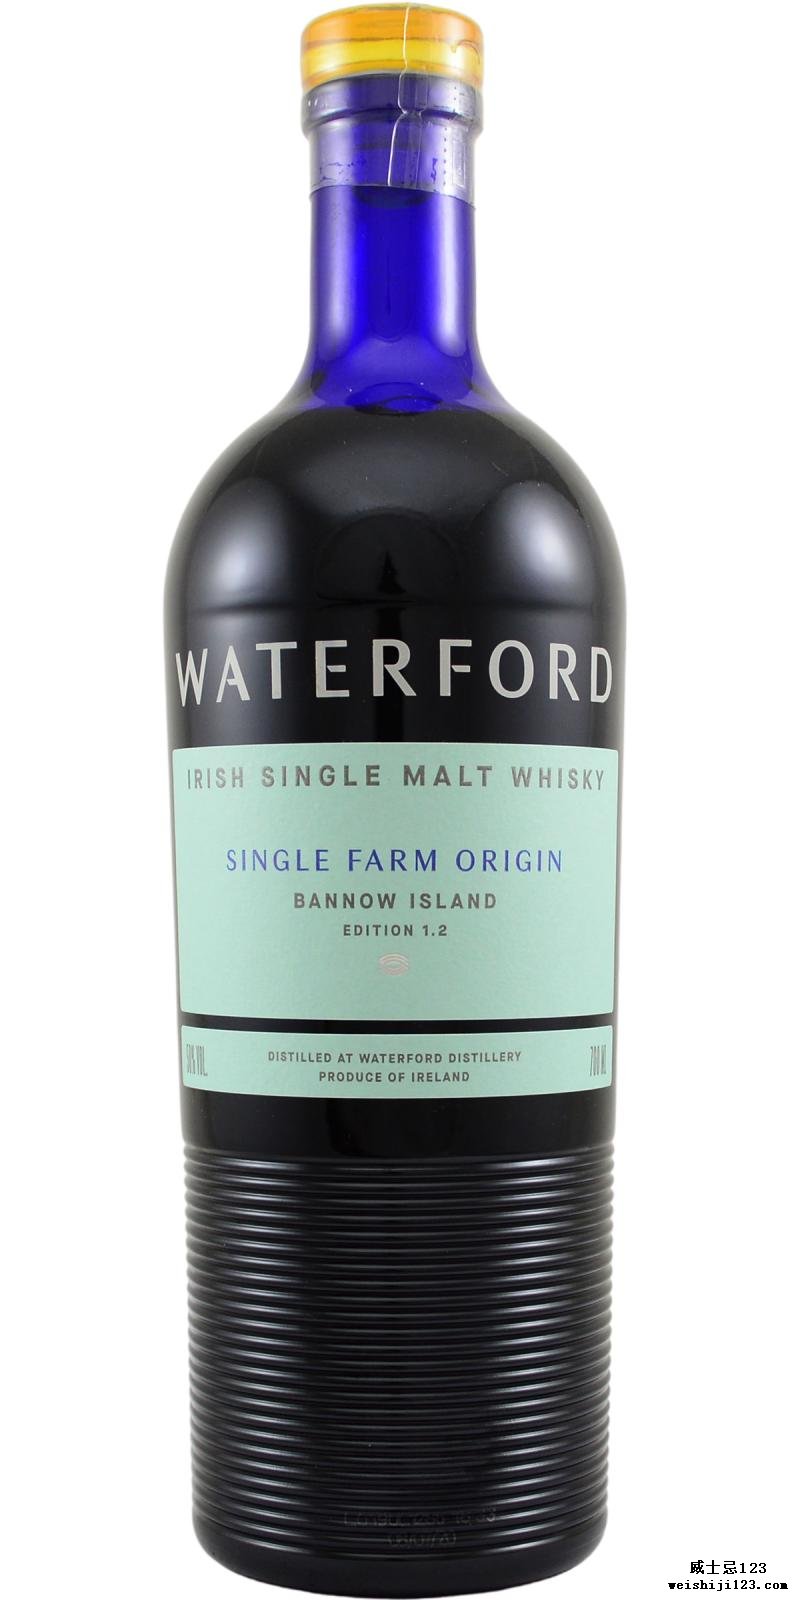 Waterford Bannow Island: Edition 1.2